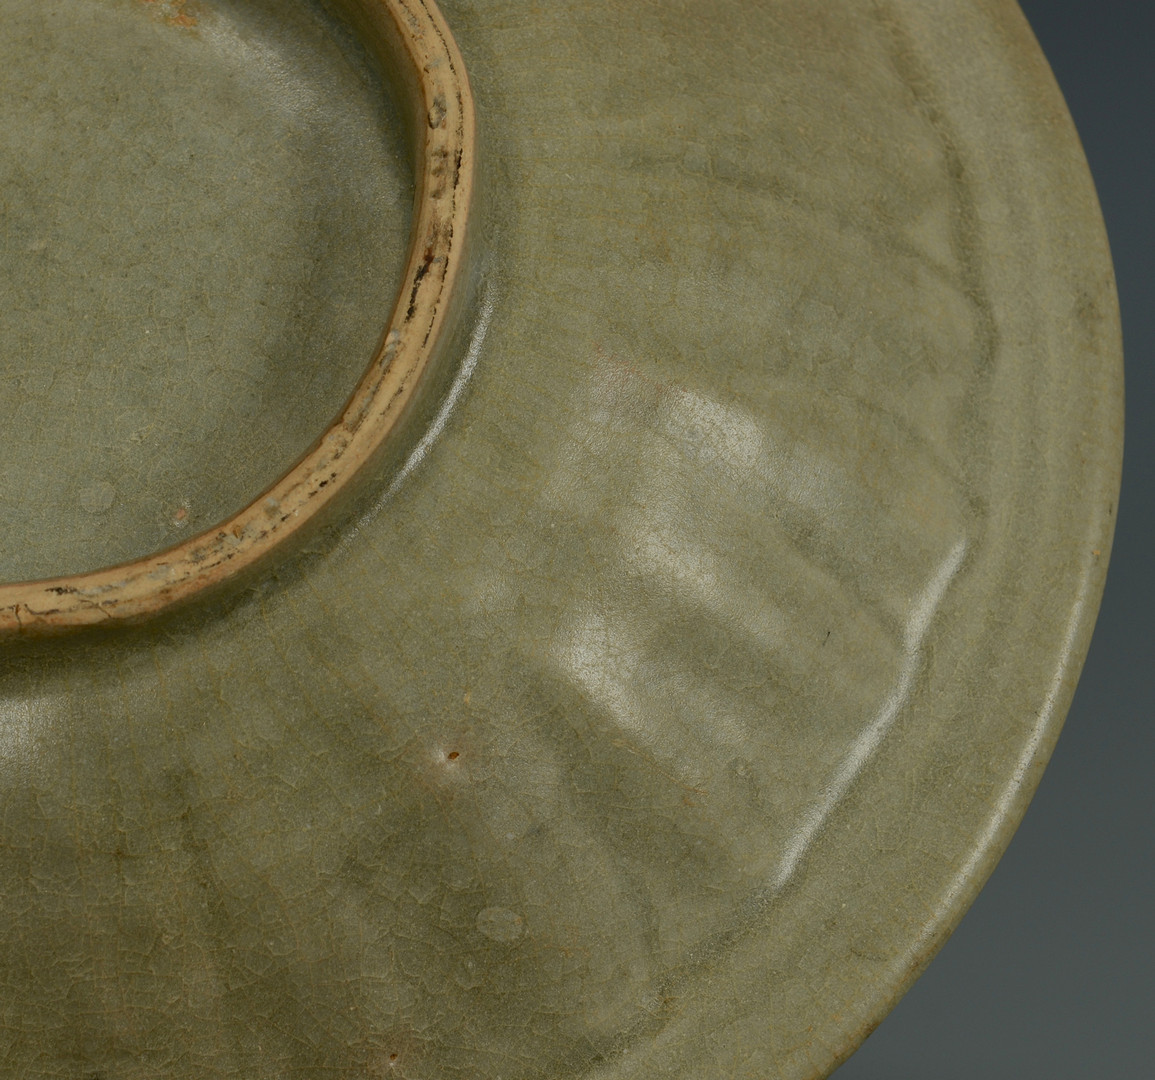 Lot 13: Chinese Sung & Ming Dynasty Bowls